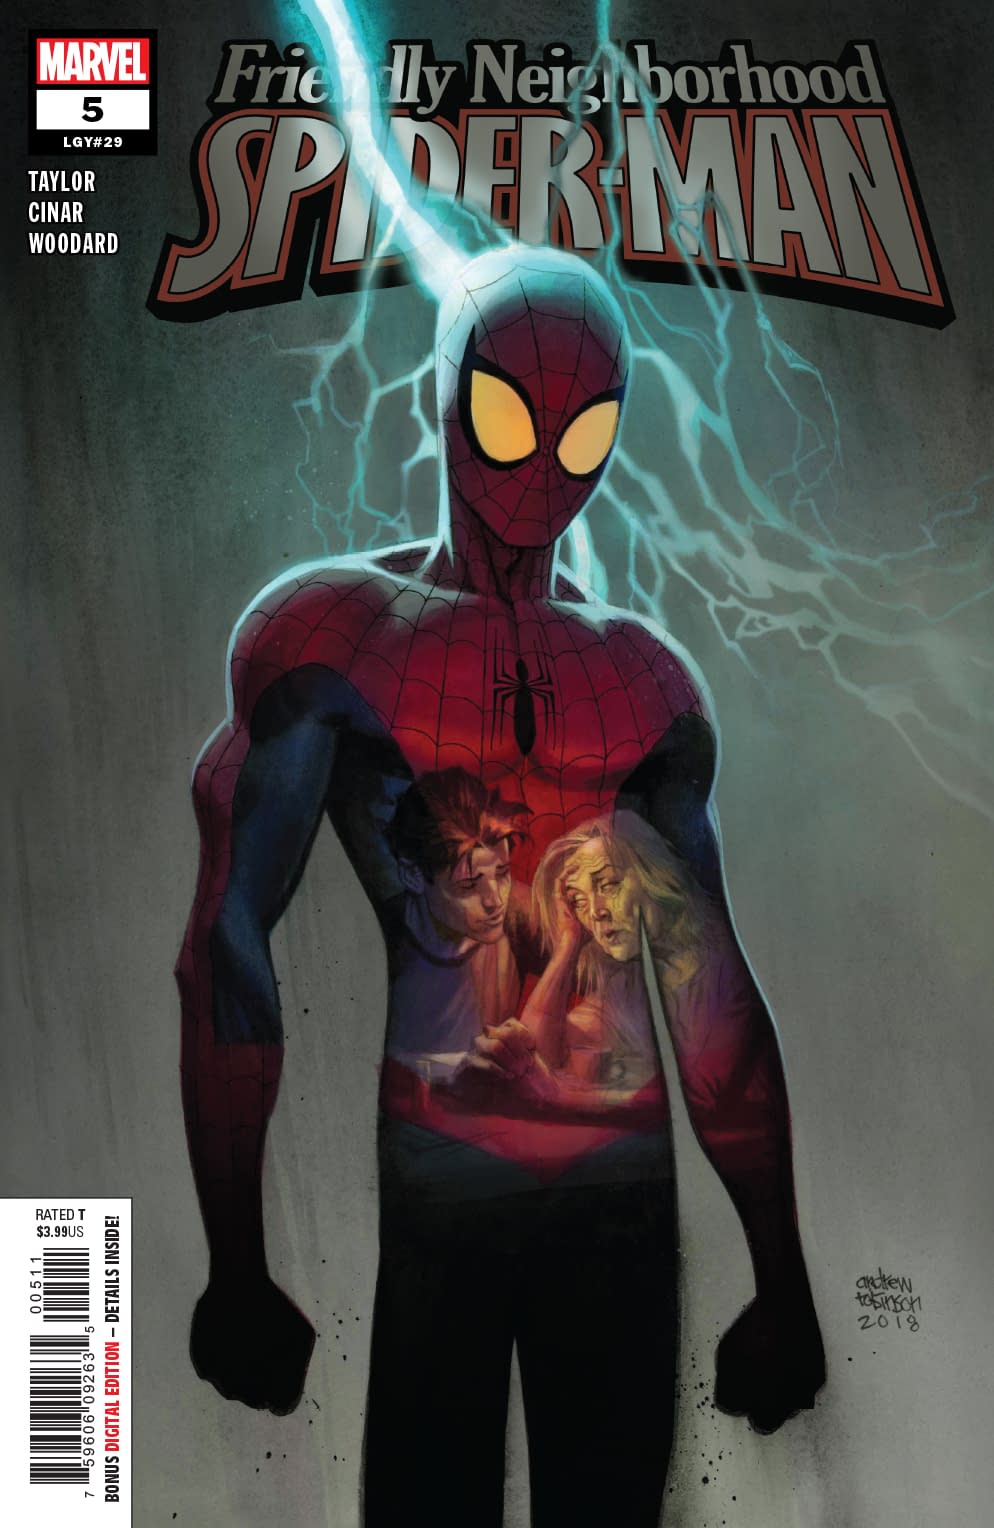 Spider-Man Too Busy to Help Aunt May with Her Chemo in Friendly Neighborhood Spider-Man #5